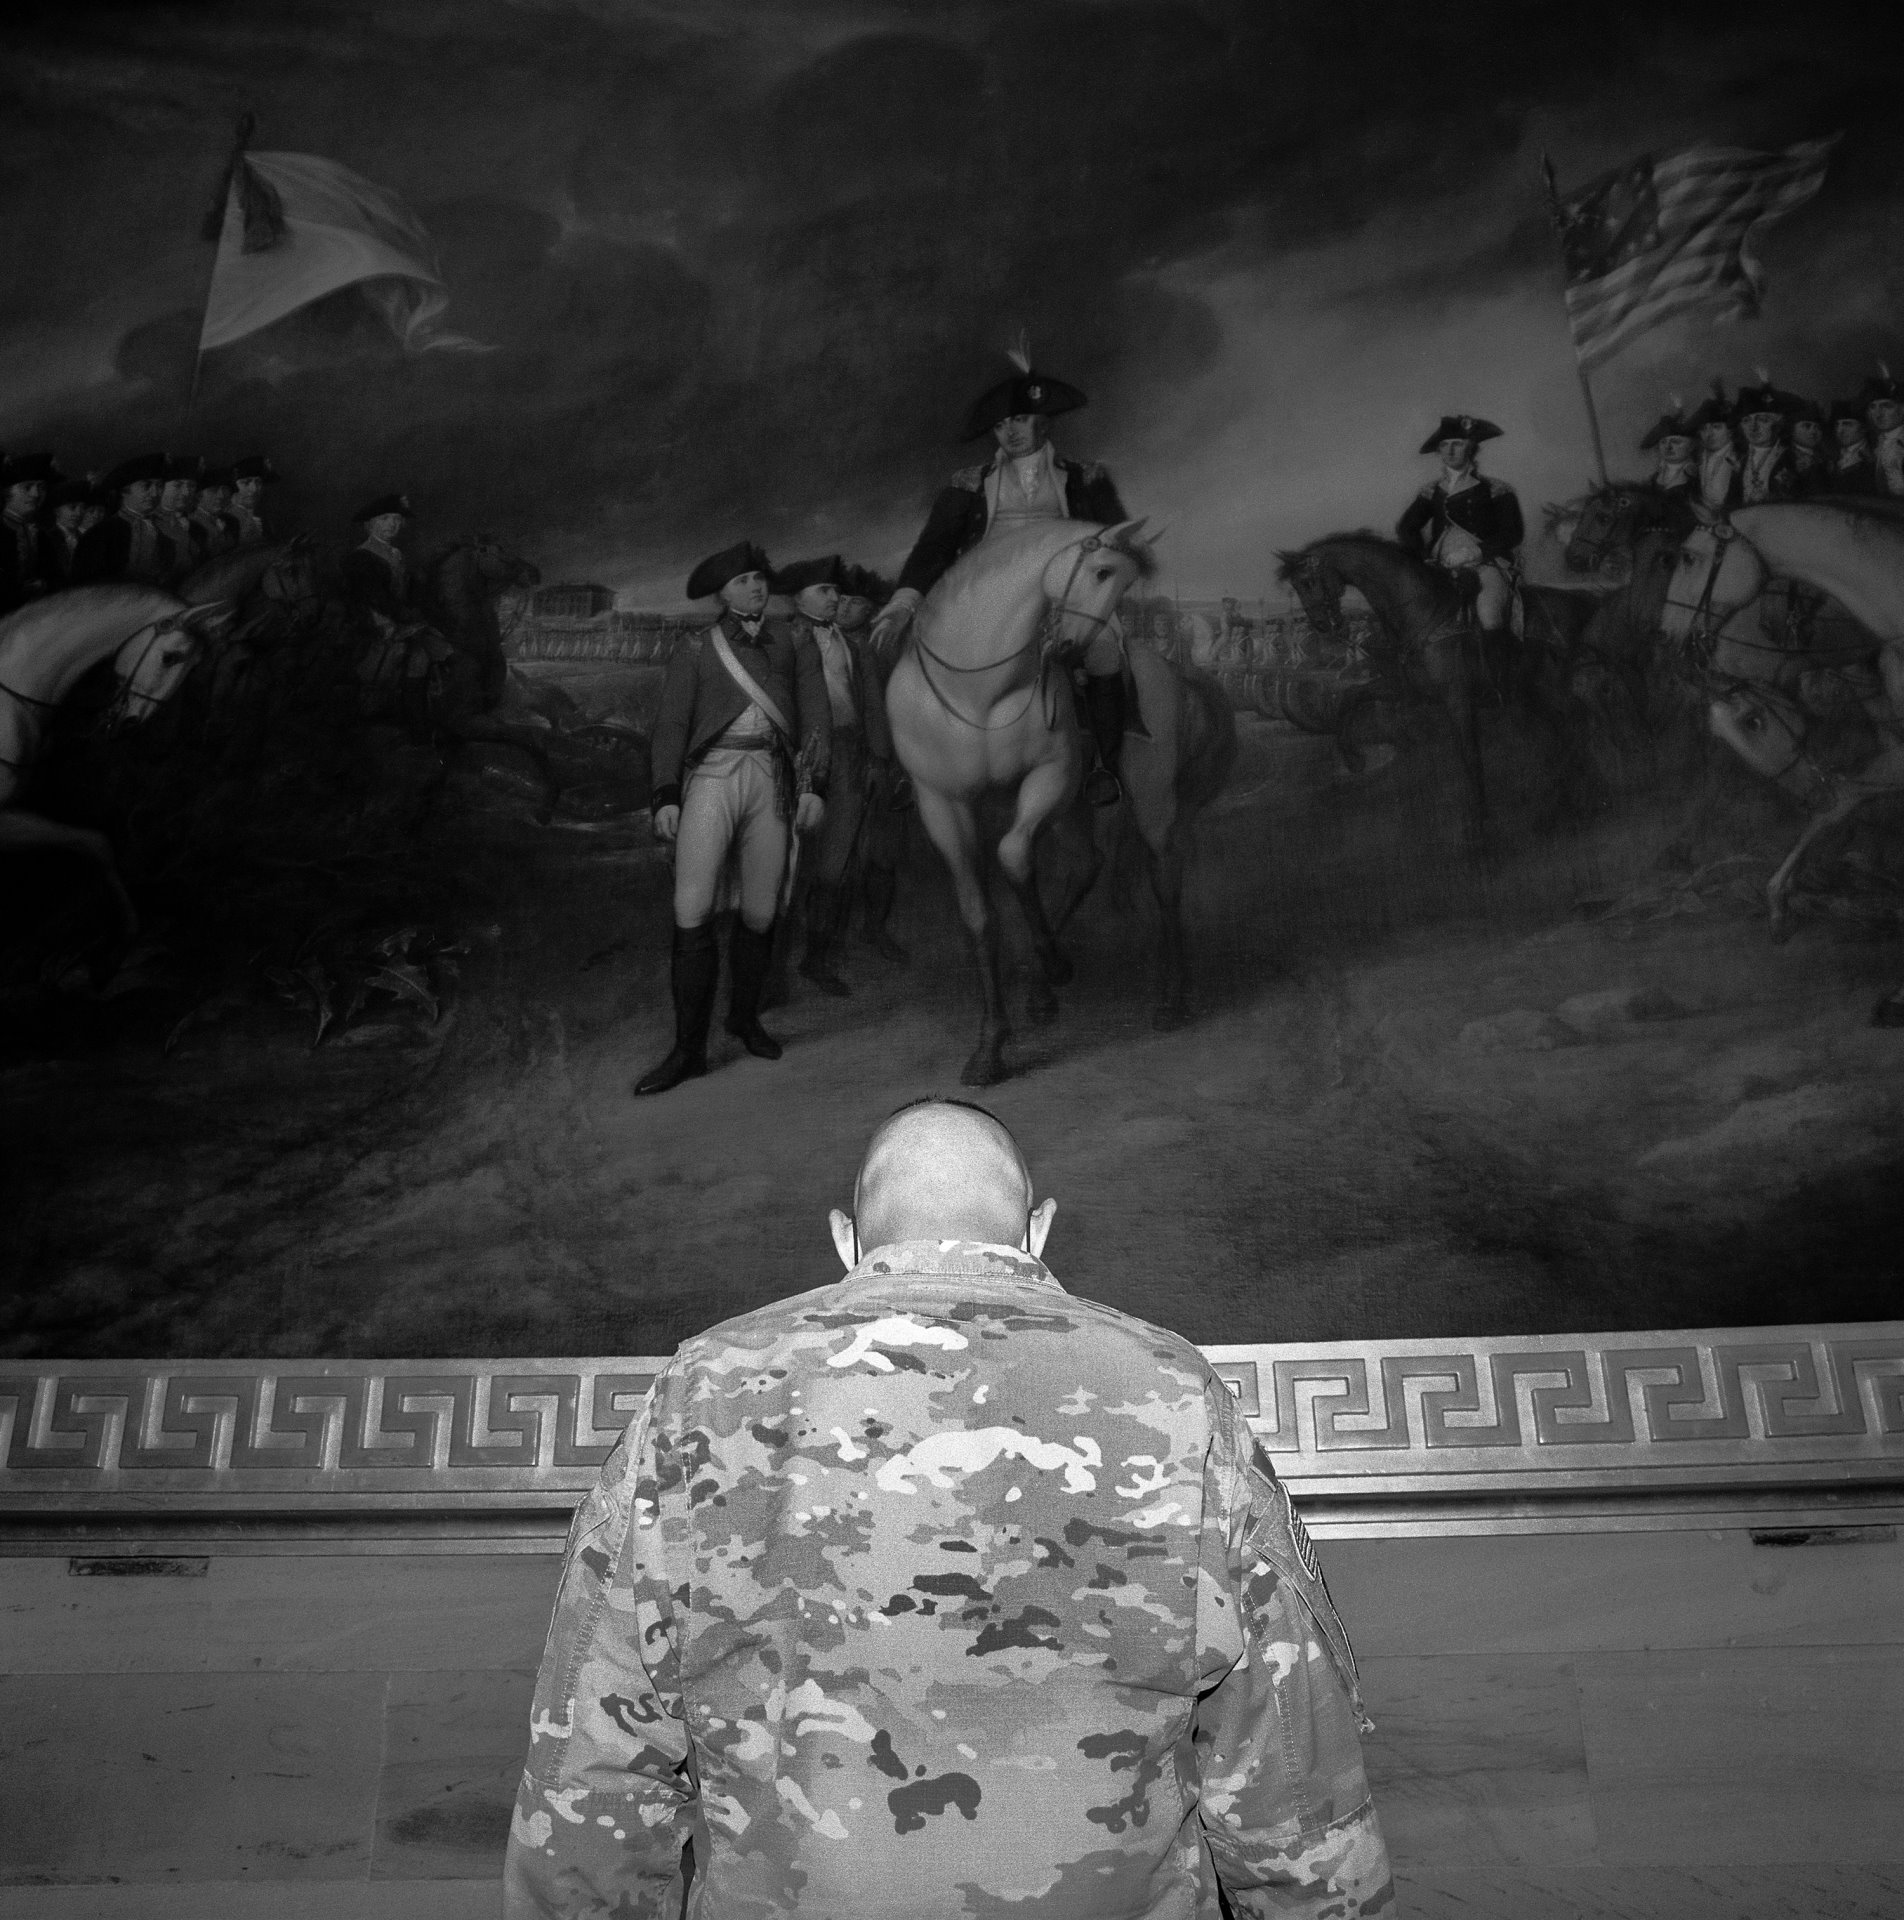 A member of the National Guard called on to protect the Capitol in Washington DC, USA, in the wake of the 6 January attack by pro-Trump supporters, views the &lsquo;Surrender of Lord Cornwallis&rsquo;, which depicts the surrender of the British to an army lead by George Washington during the American Revolution.